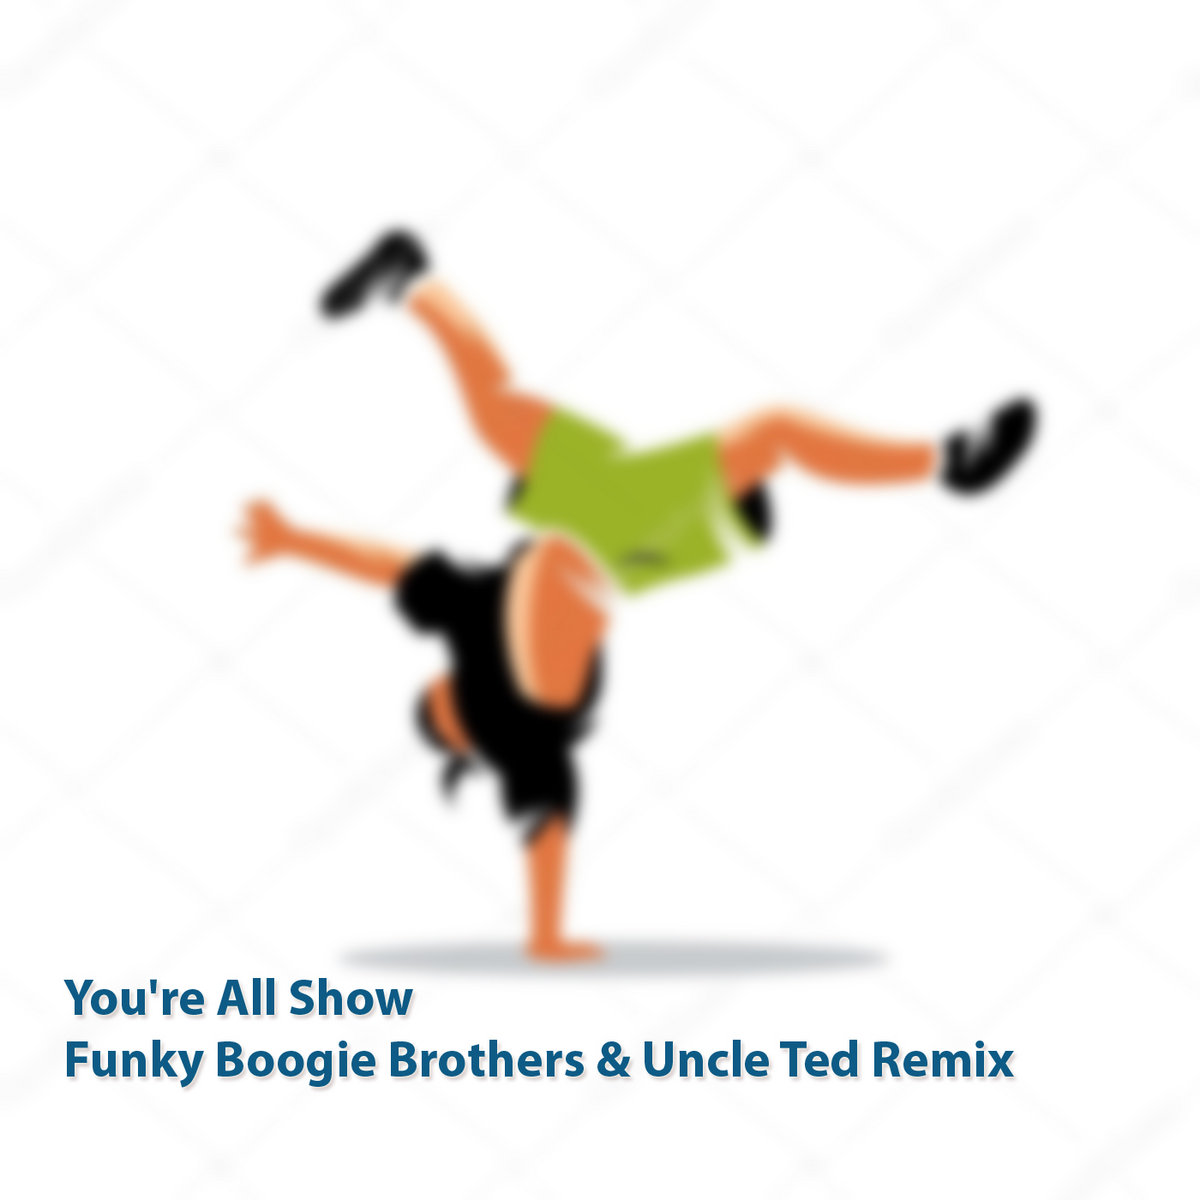 Aldo Vanucci - You're All Show (Funky Boogie Brothers & Uncle Ted Remix)